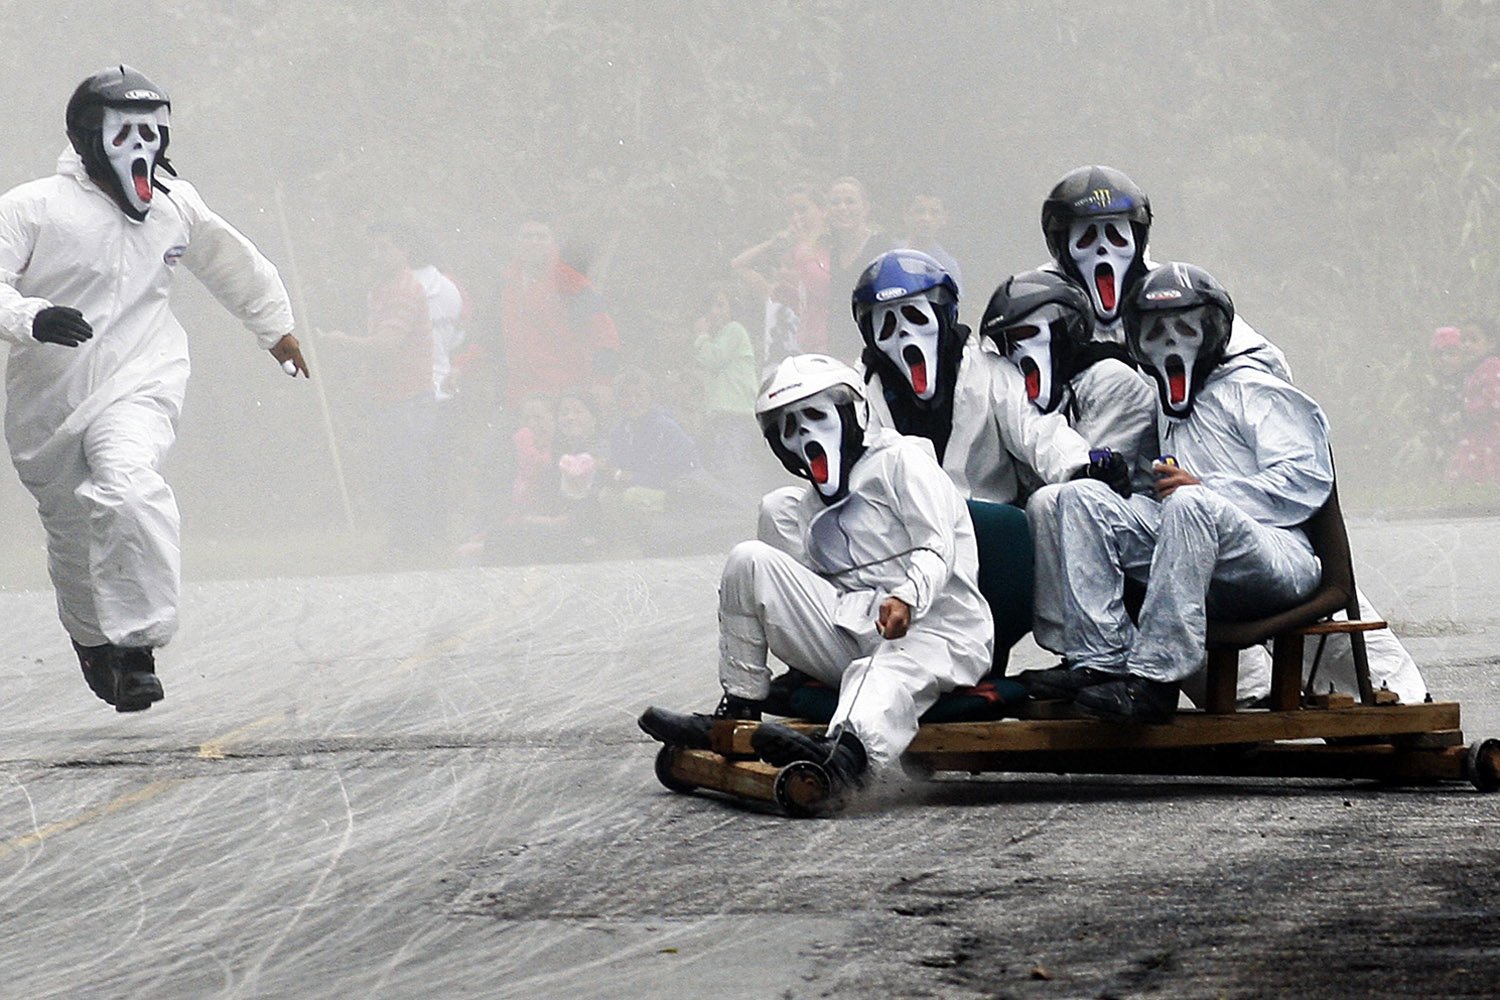 Participants descend a hill on a homemade roller cart during the 25th Roller Cart Festival in Medellin